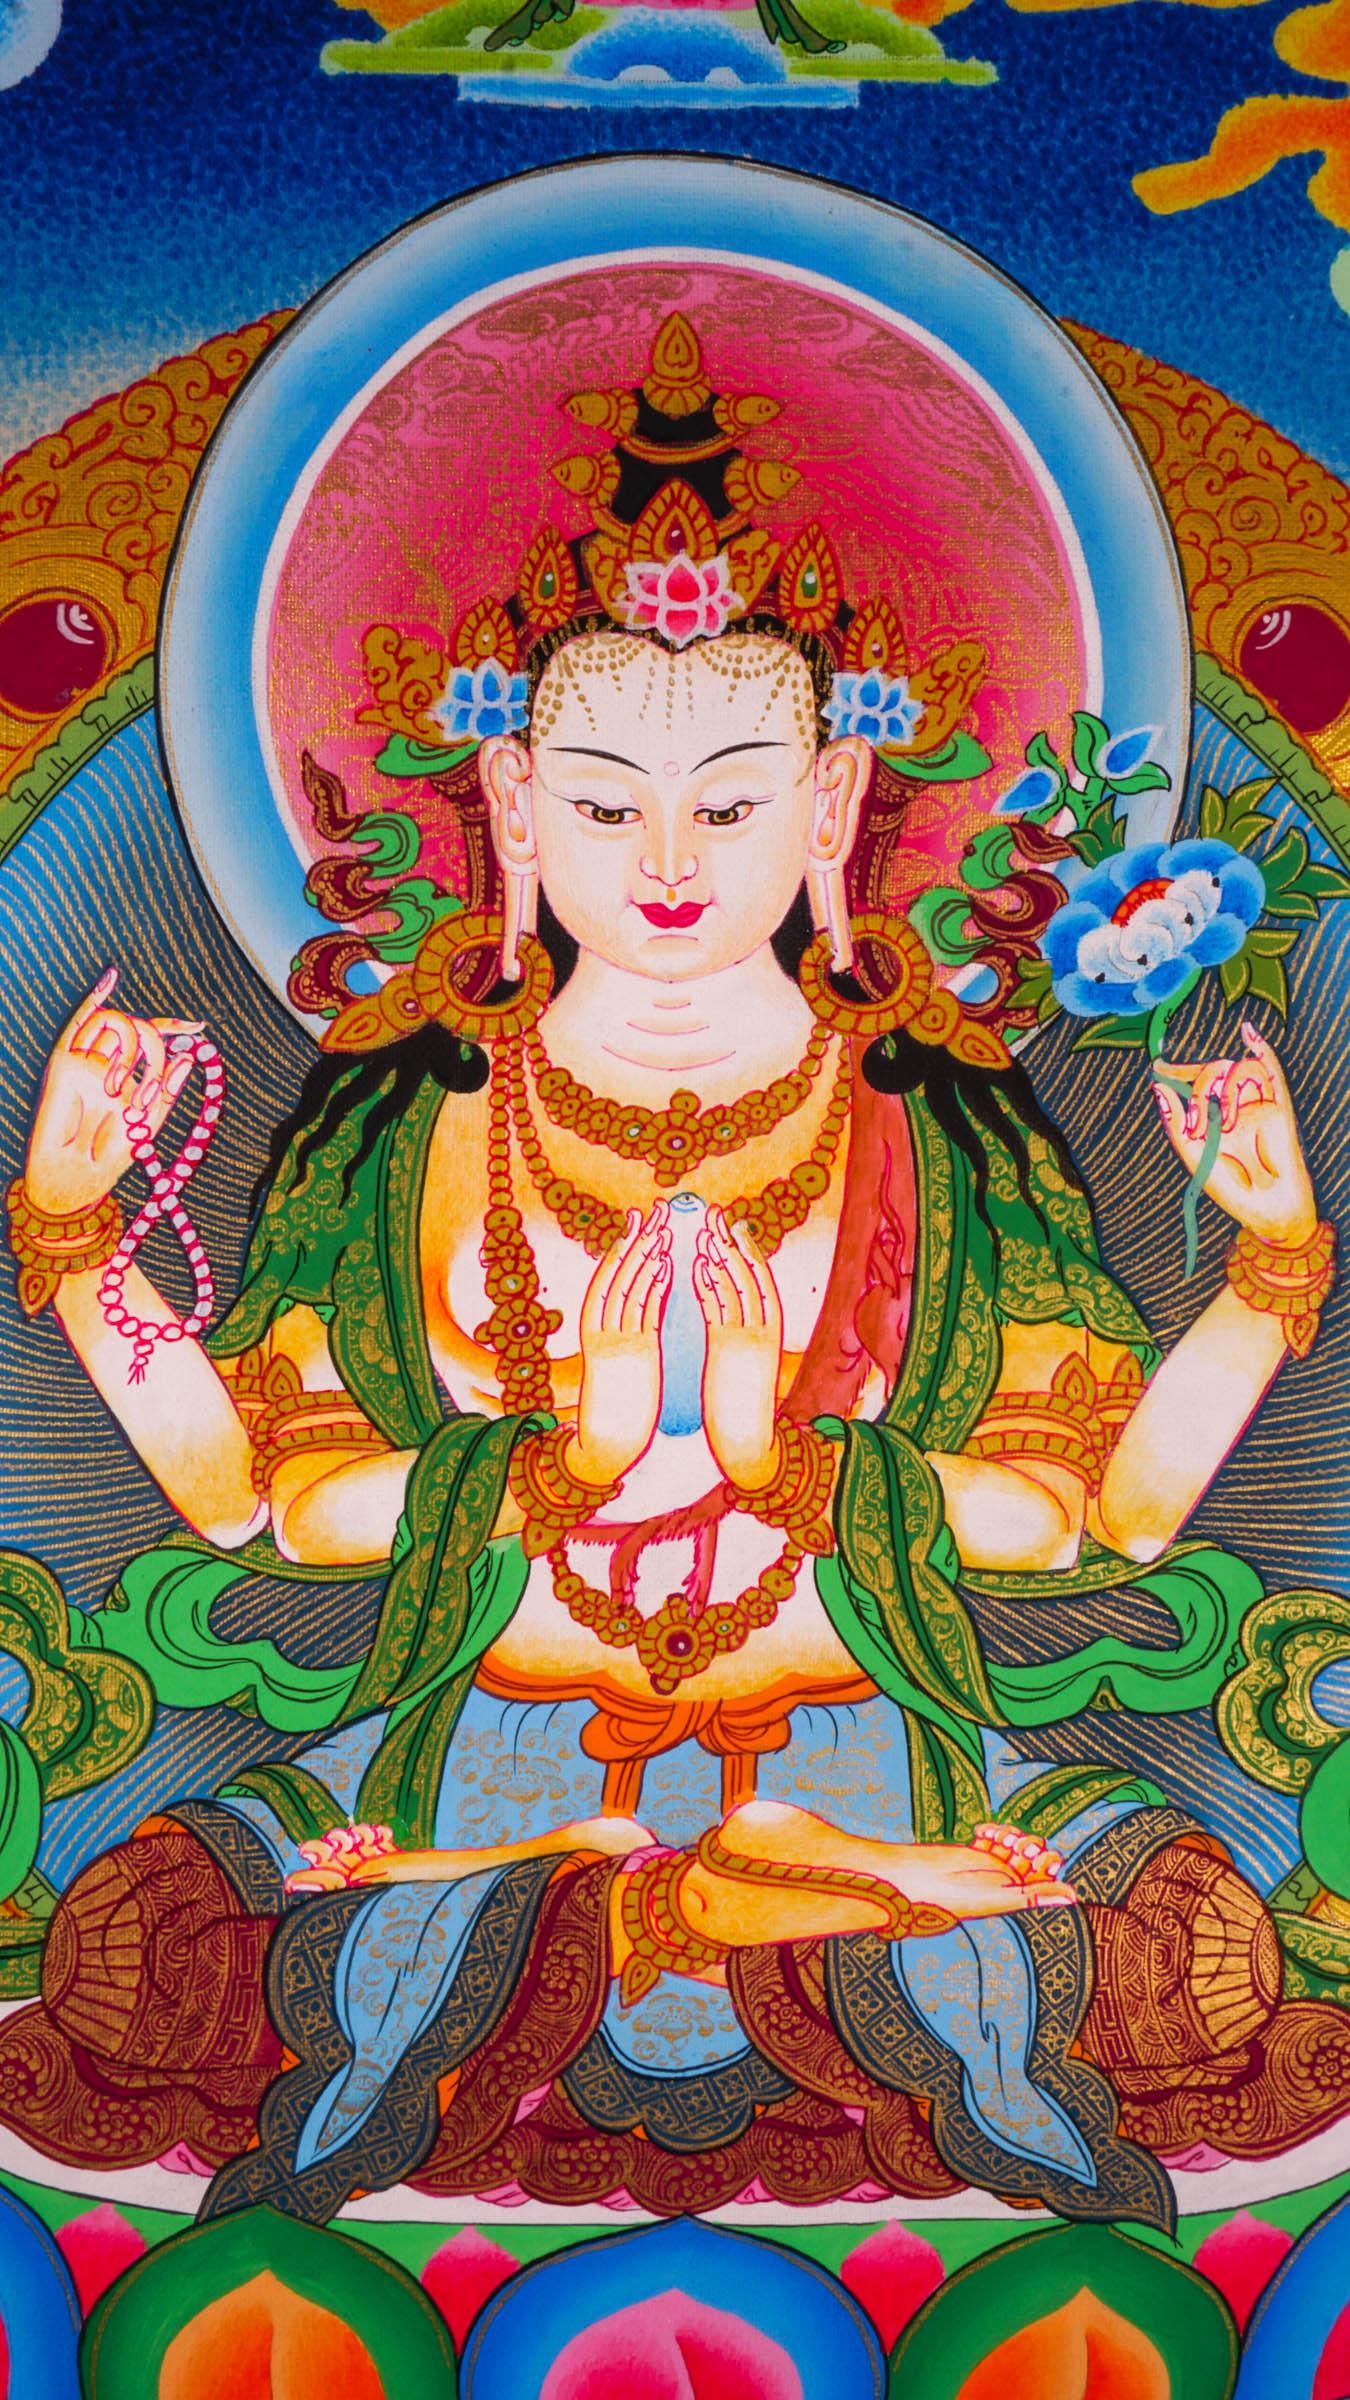 Chenrezig Thangka Painting with two deities